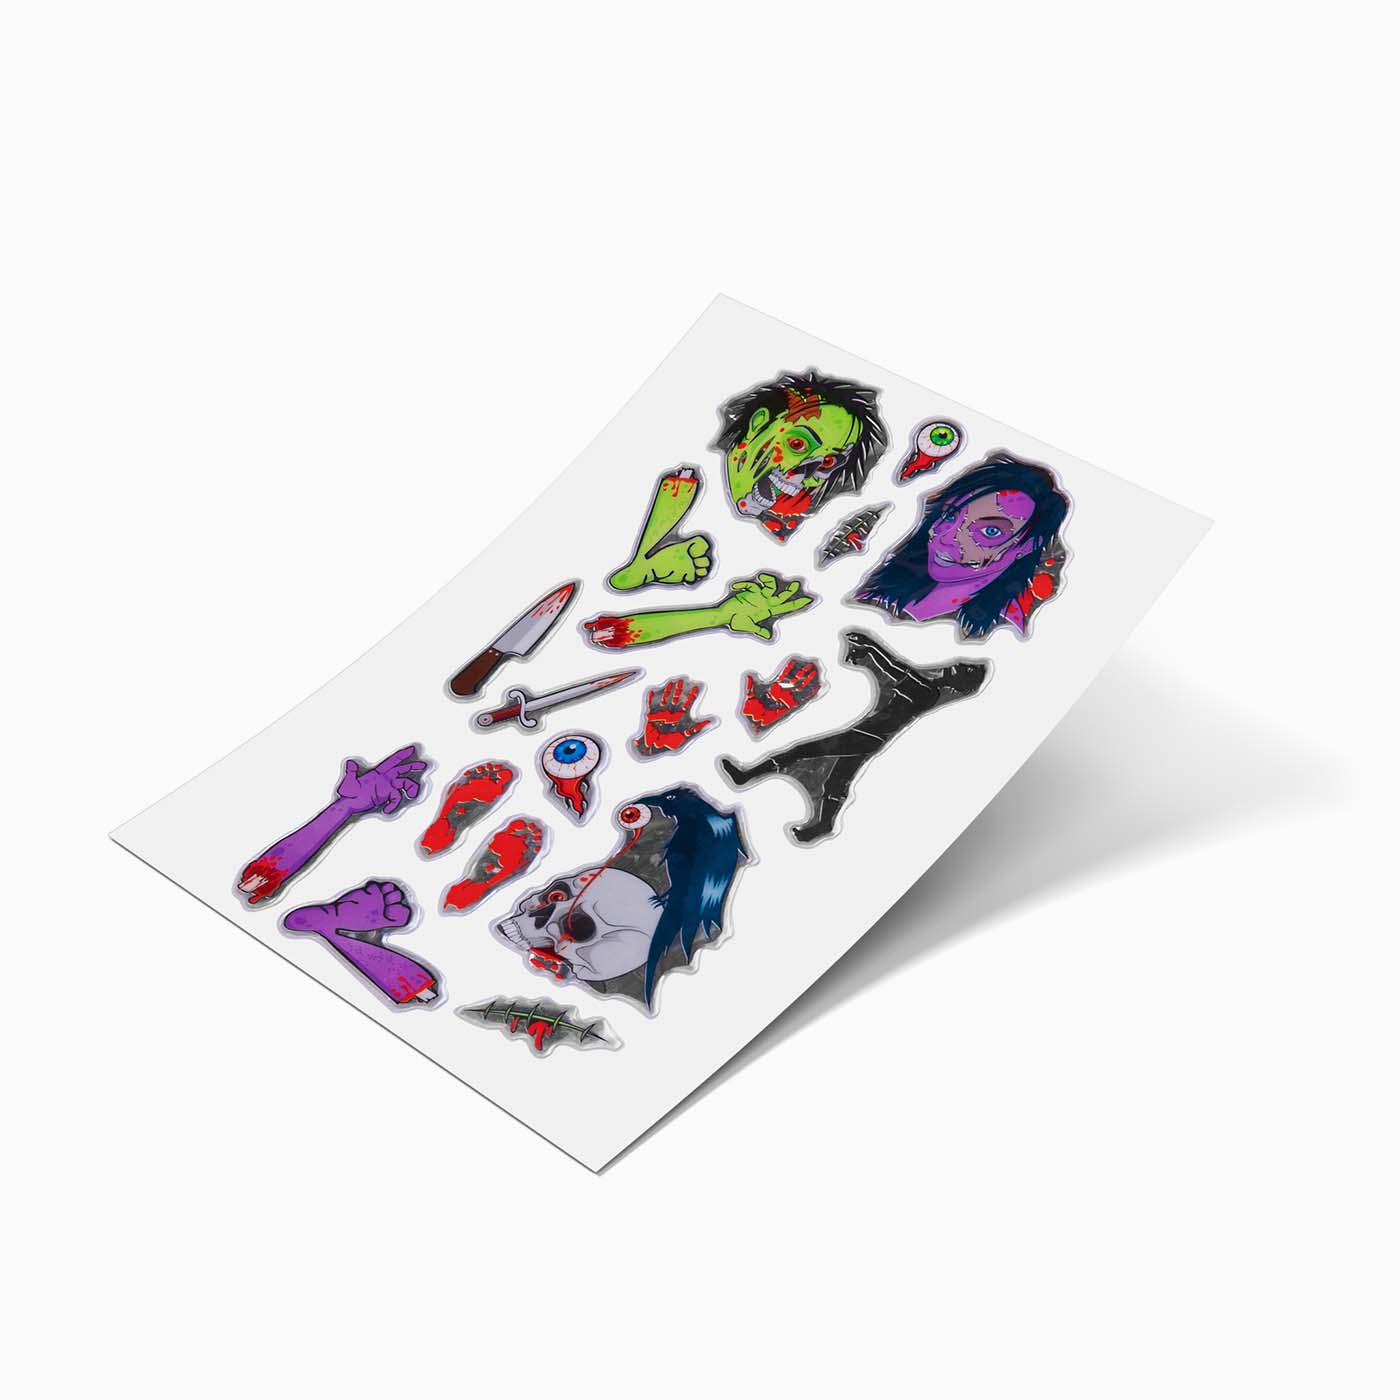 Zombies relief stickers